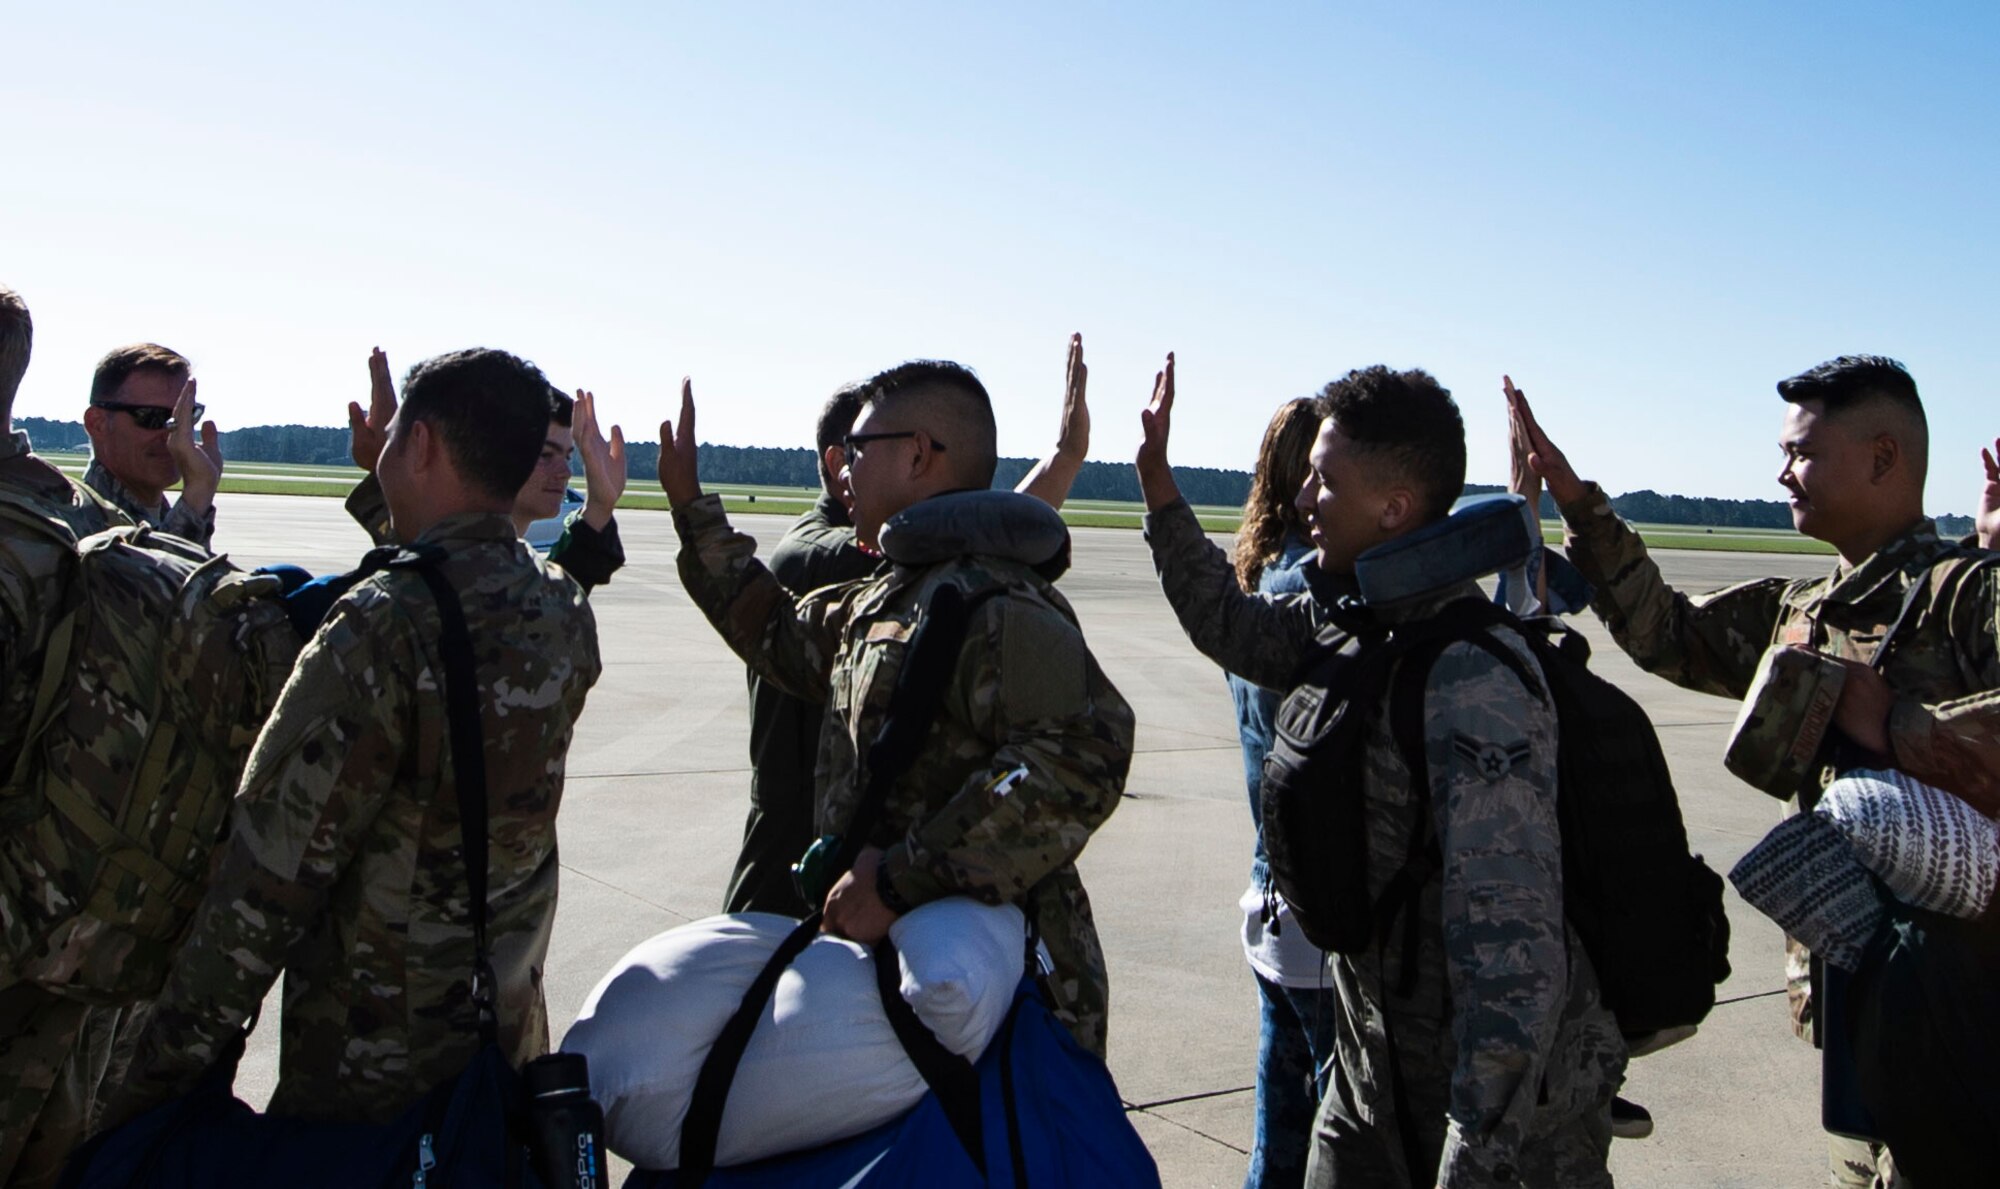 U.S. Airmen assigned to the 20th Fighter Wing interact with base leadership prior to deploying from Shaw Air Force Base, S.C., Oct. 13, 2018.